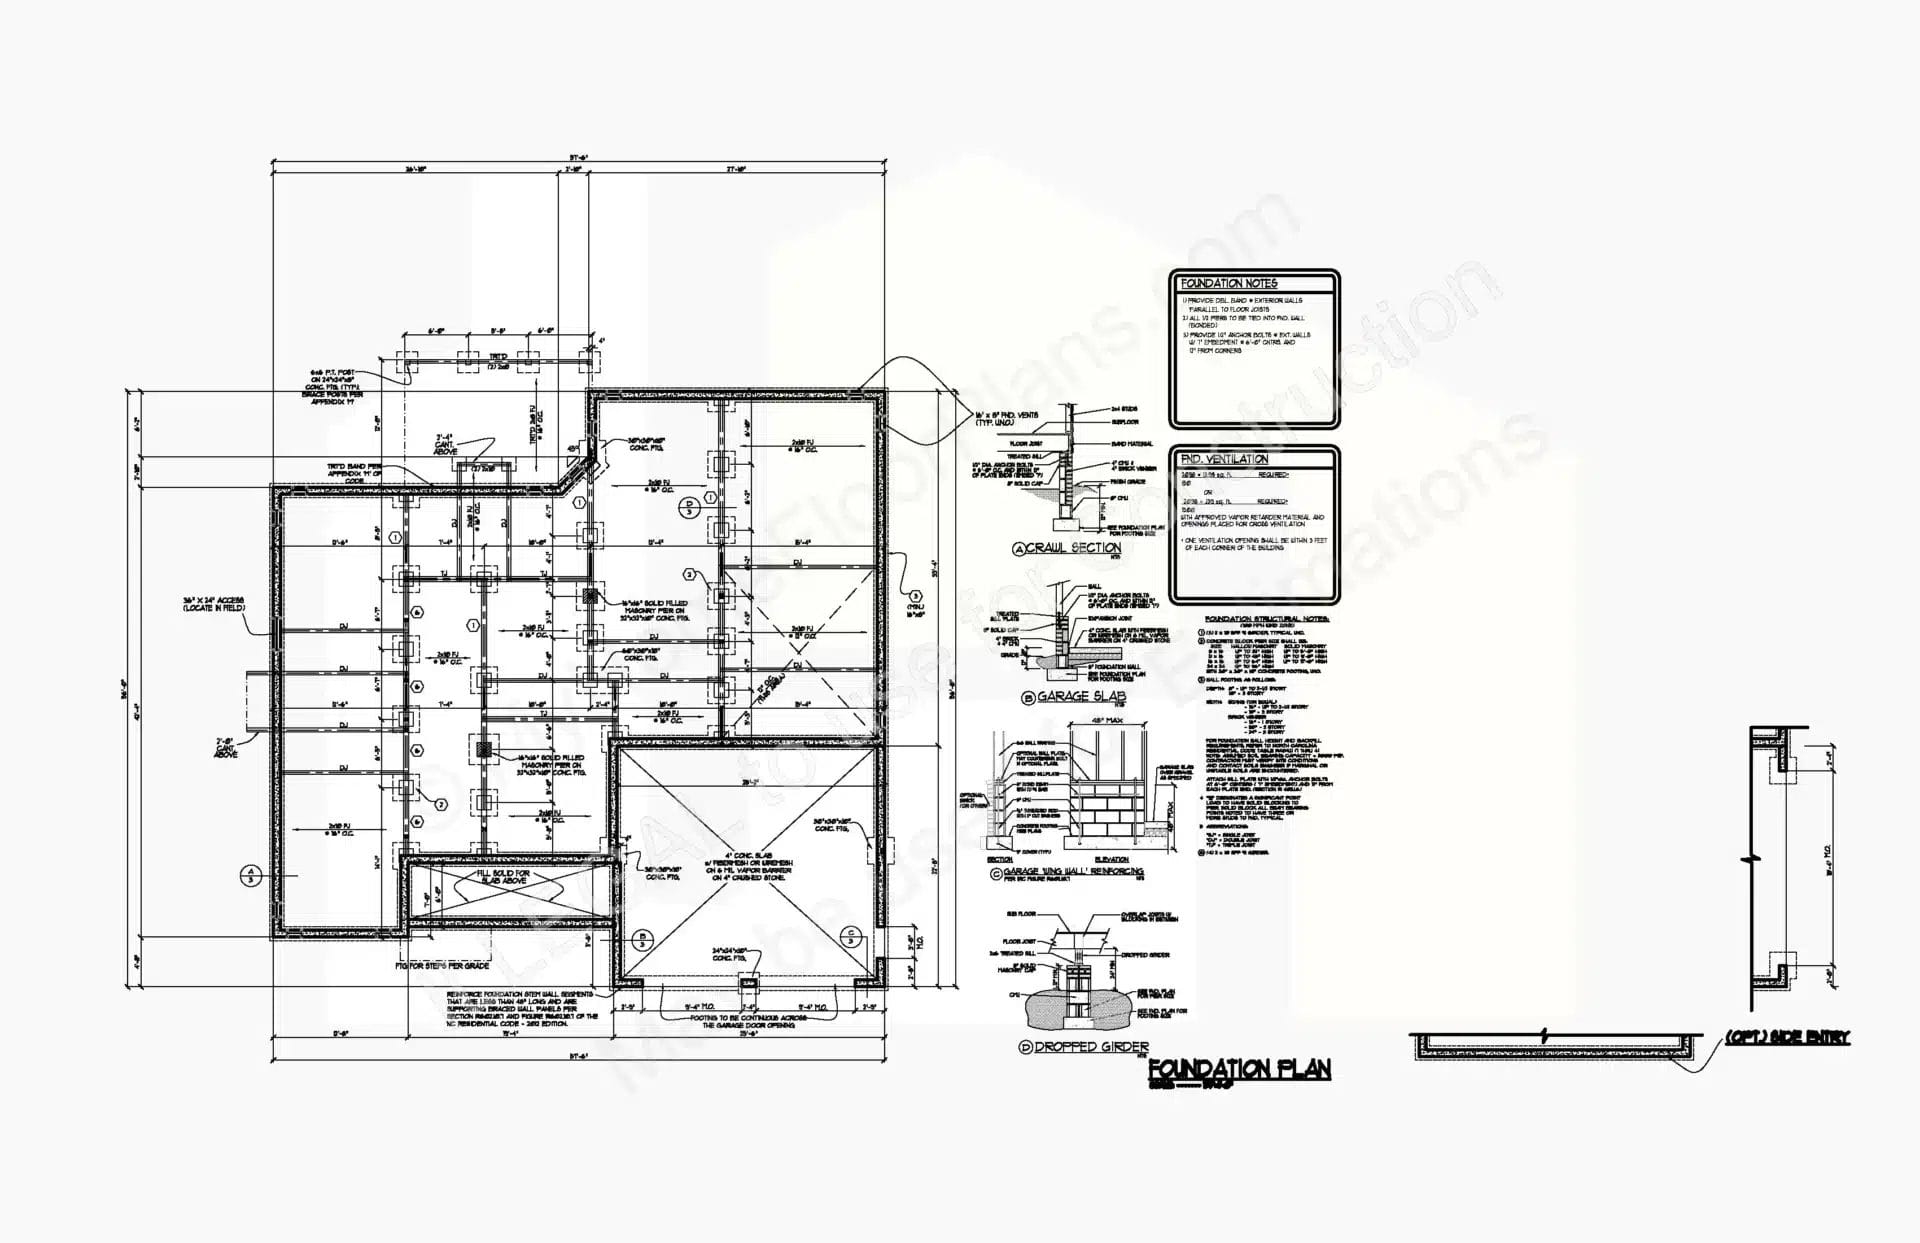 Technical architectural blueprint of a building, detailing the floor plan and elevation views with numerous annotations, measurements, and construction notes. The design includes various rooms and structural elements for product 12-2289.